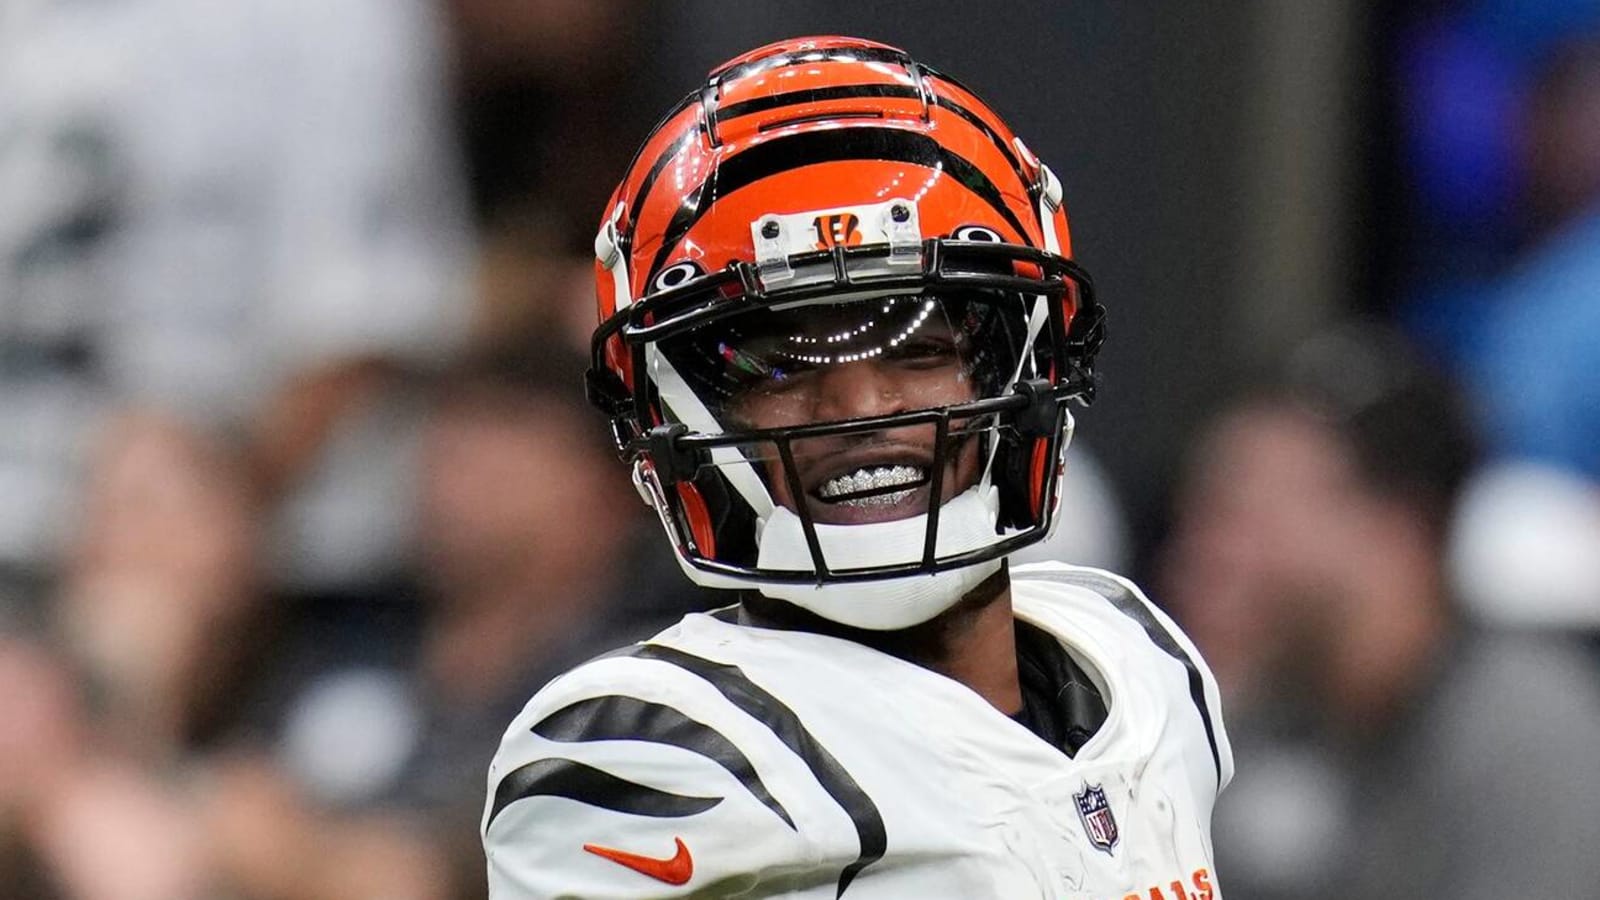 Bengals' Chase wanted to get fined on game-winning TD celebration